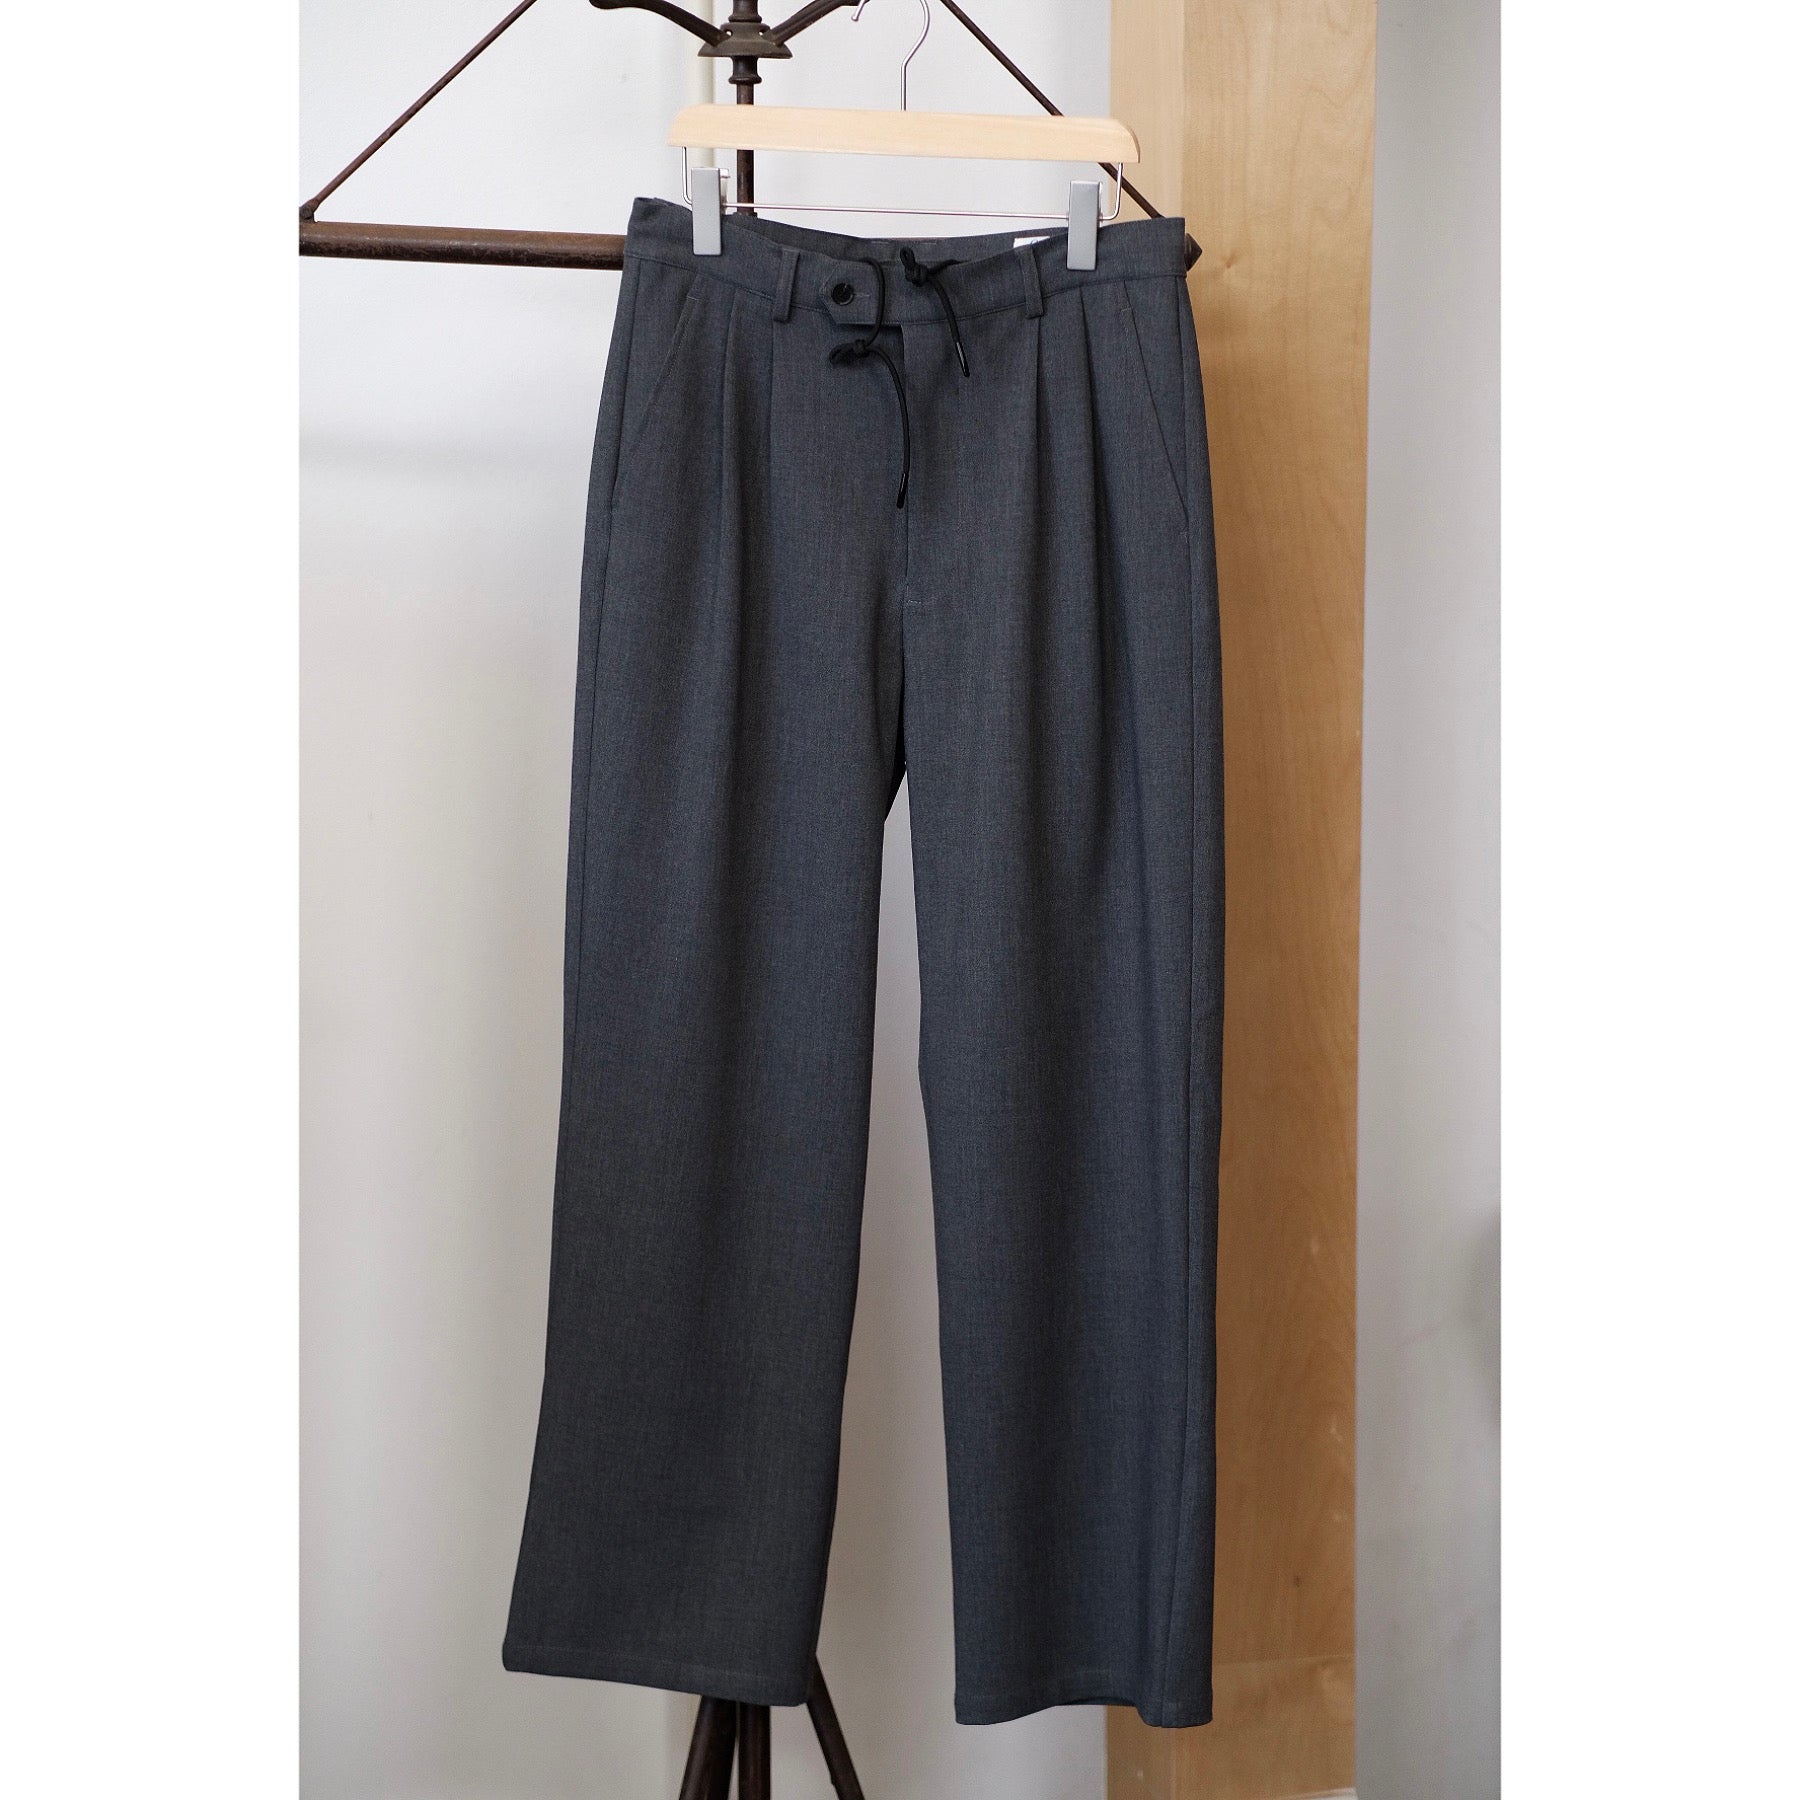 Labor Union Retro All-Match High-Waisted Wide-Leg Trousers